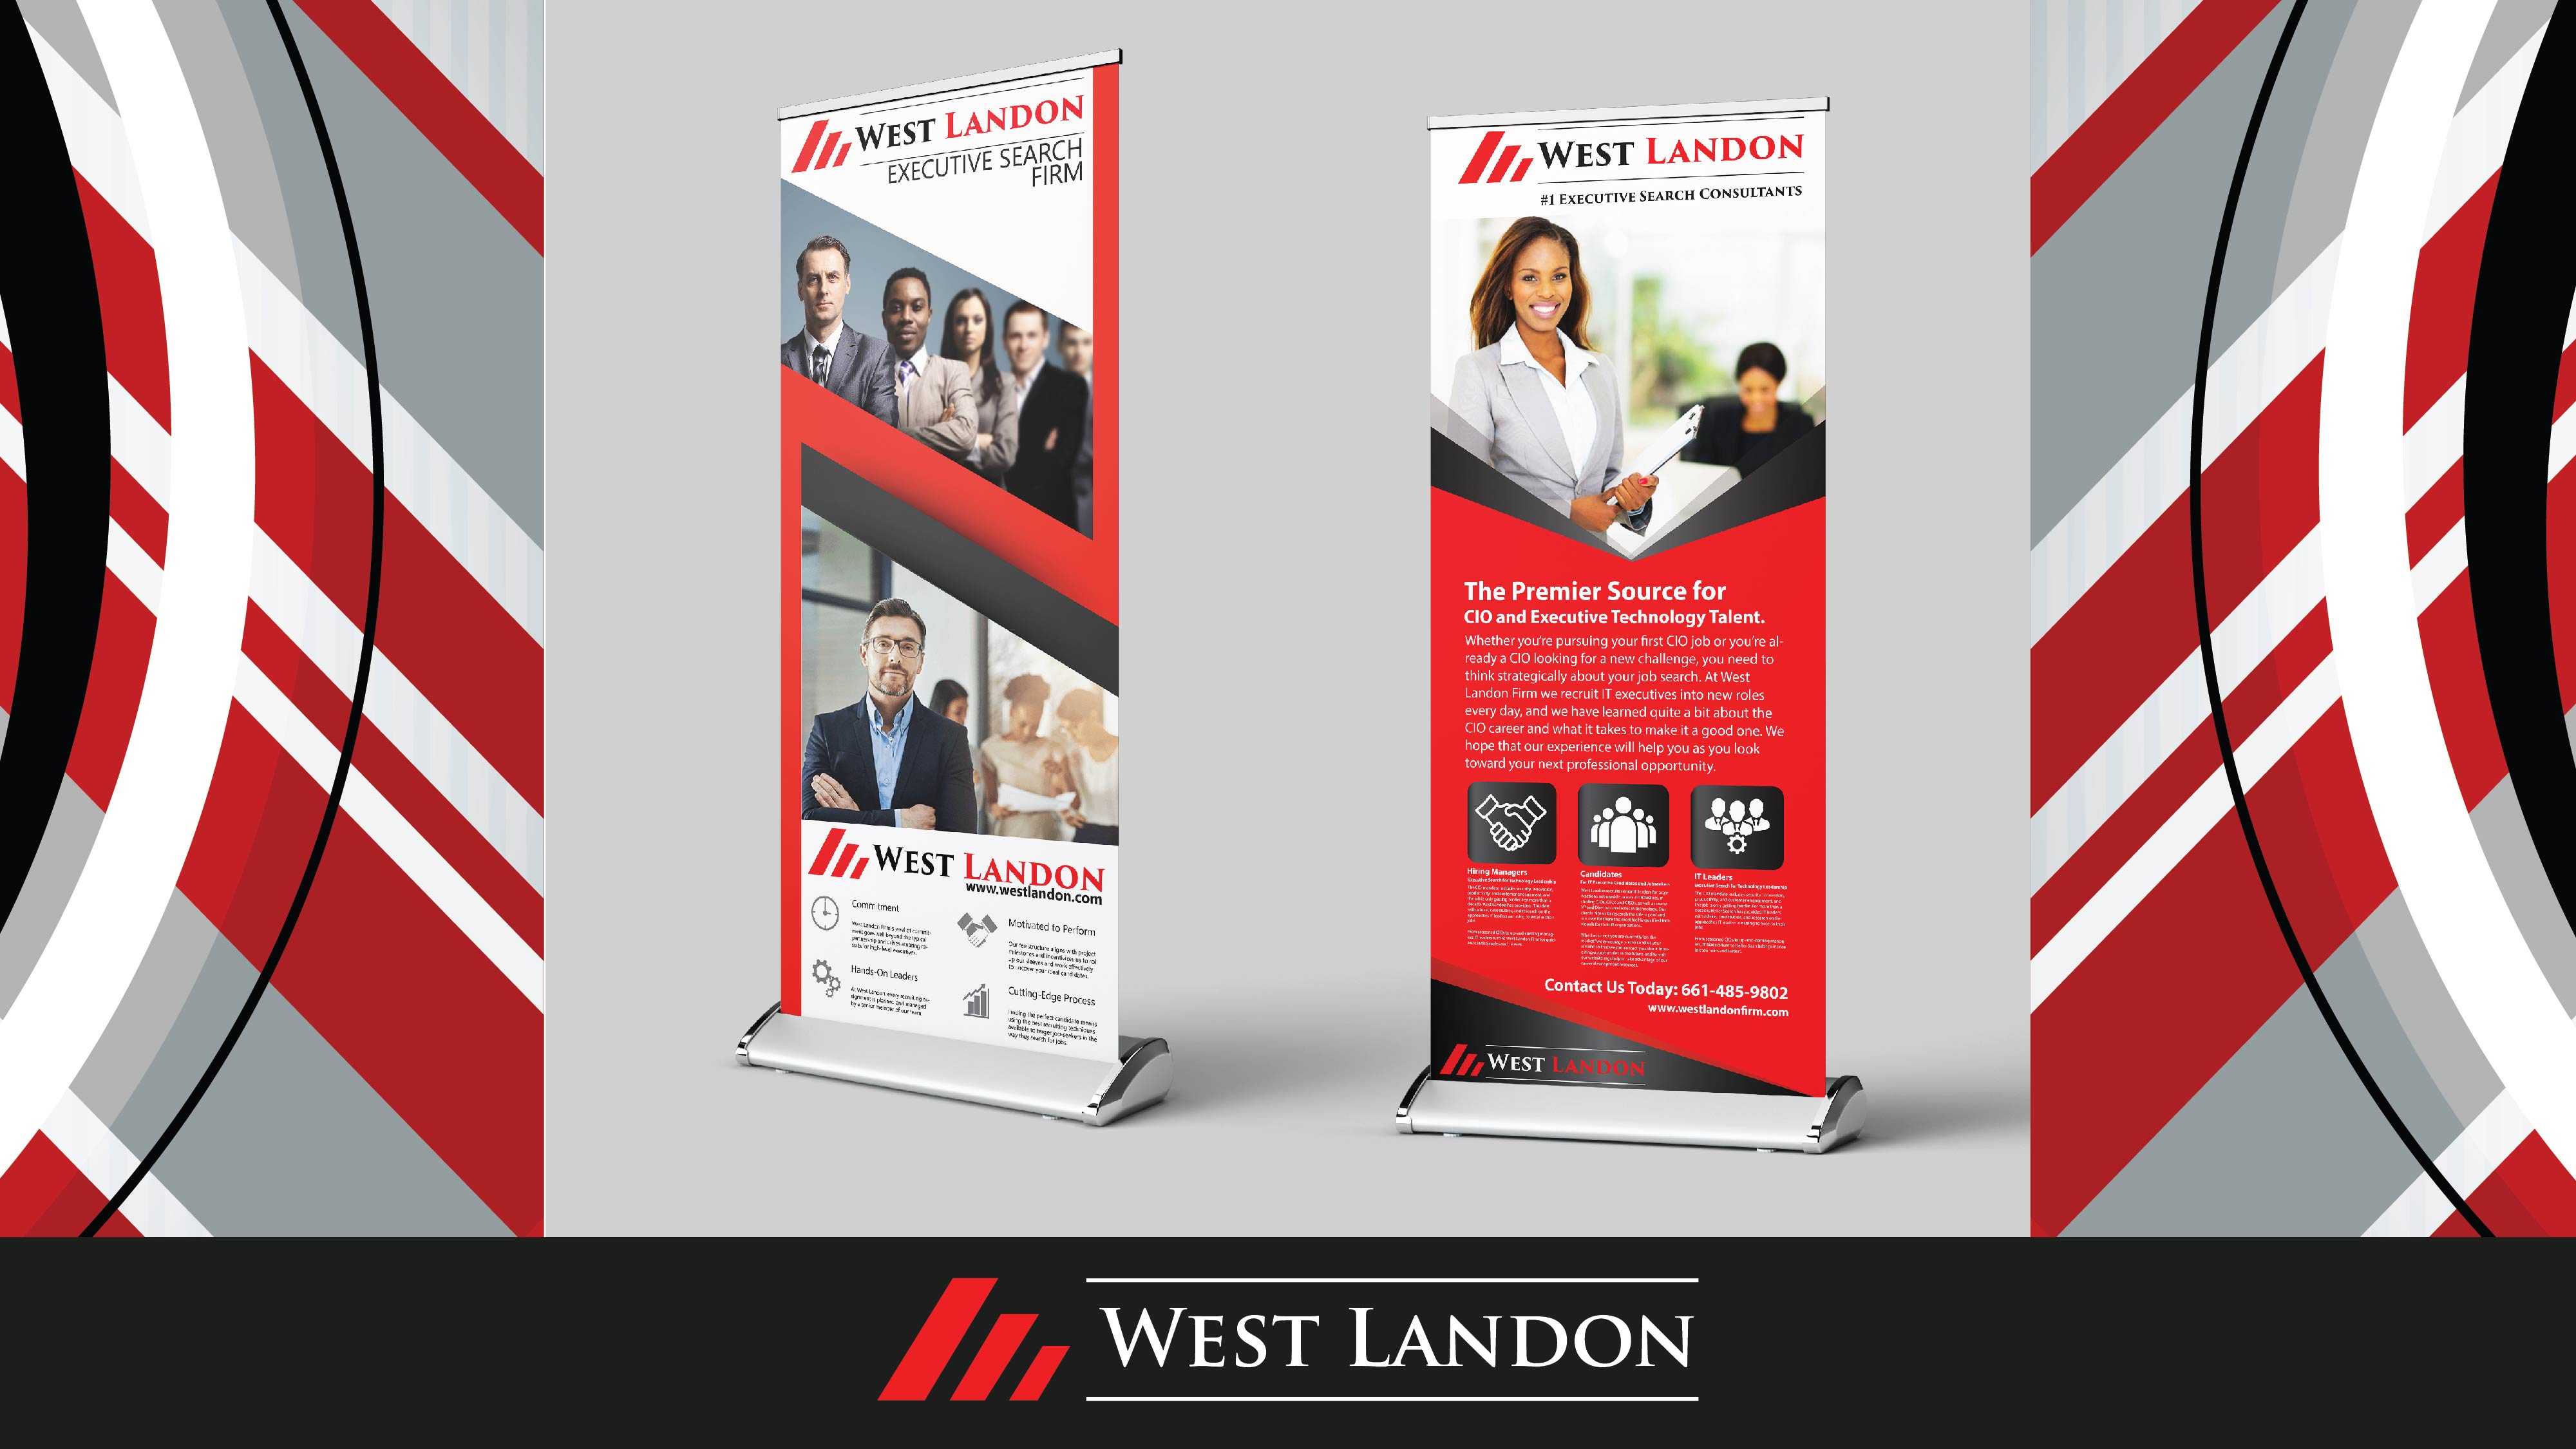 West Landon logo on two featured retractable banners on a red, white, black, and gray background.